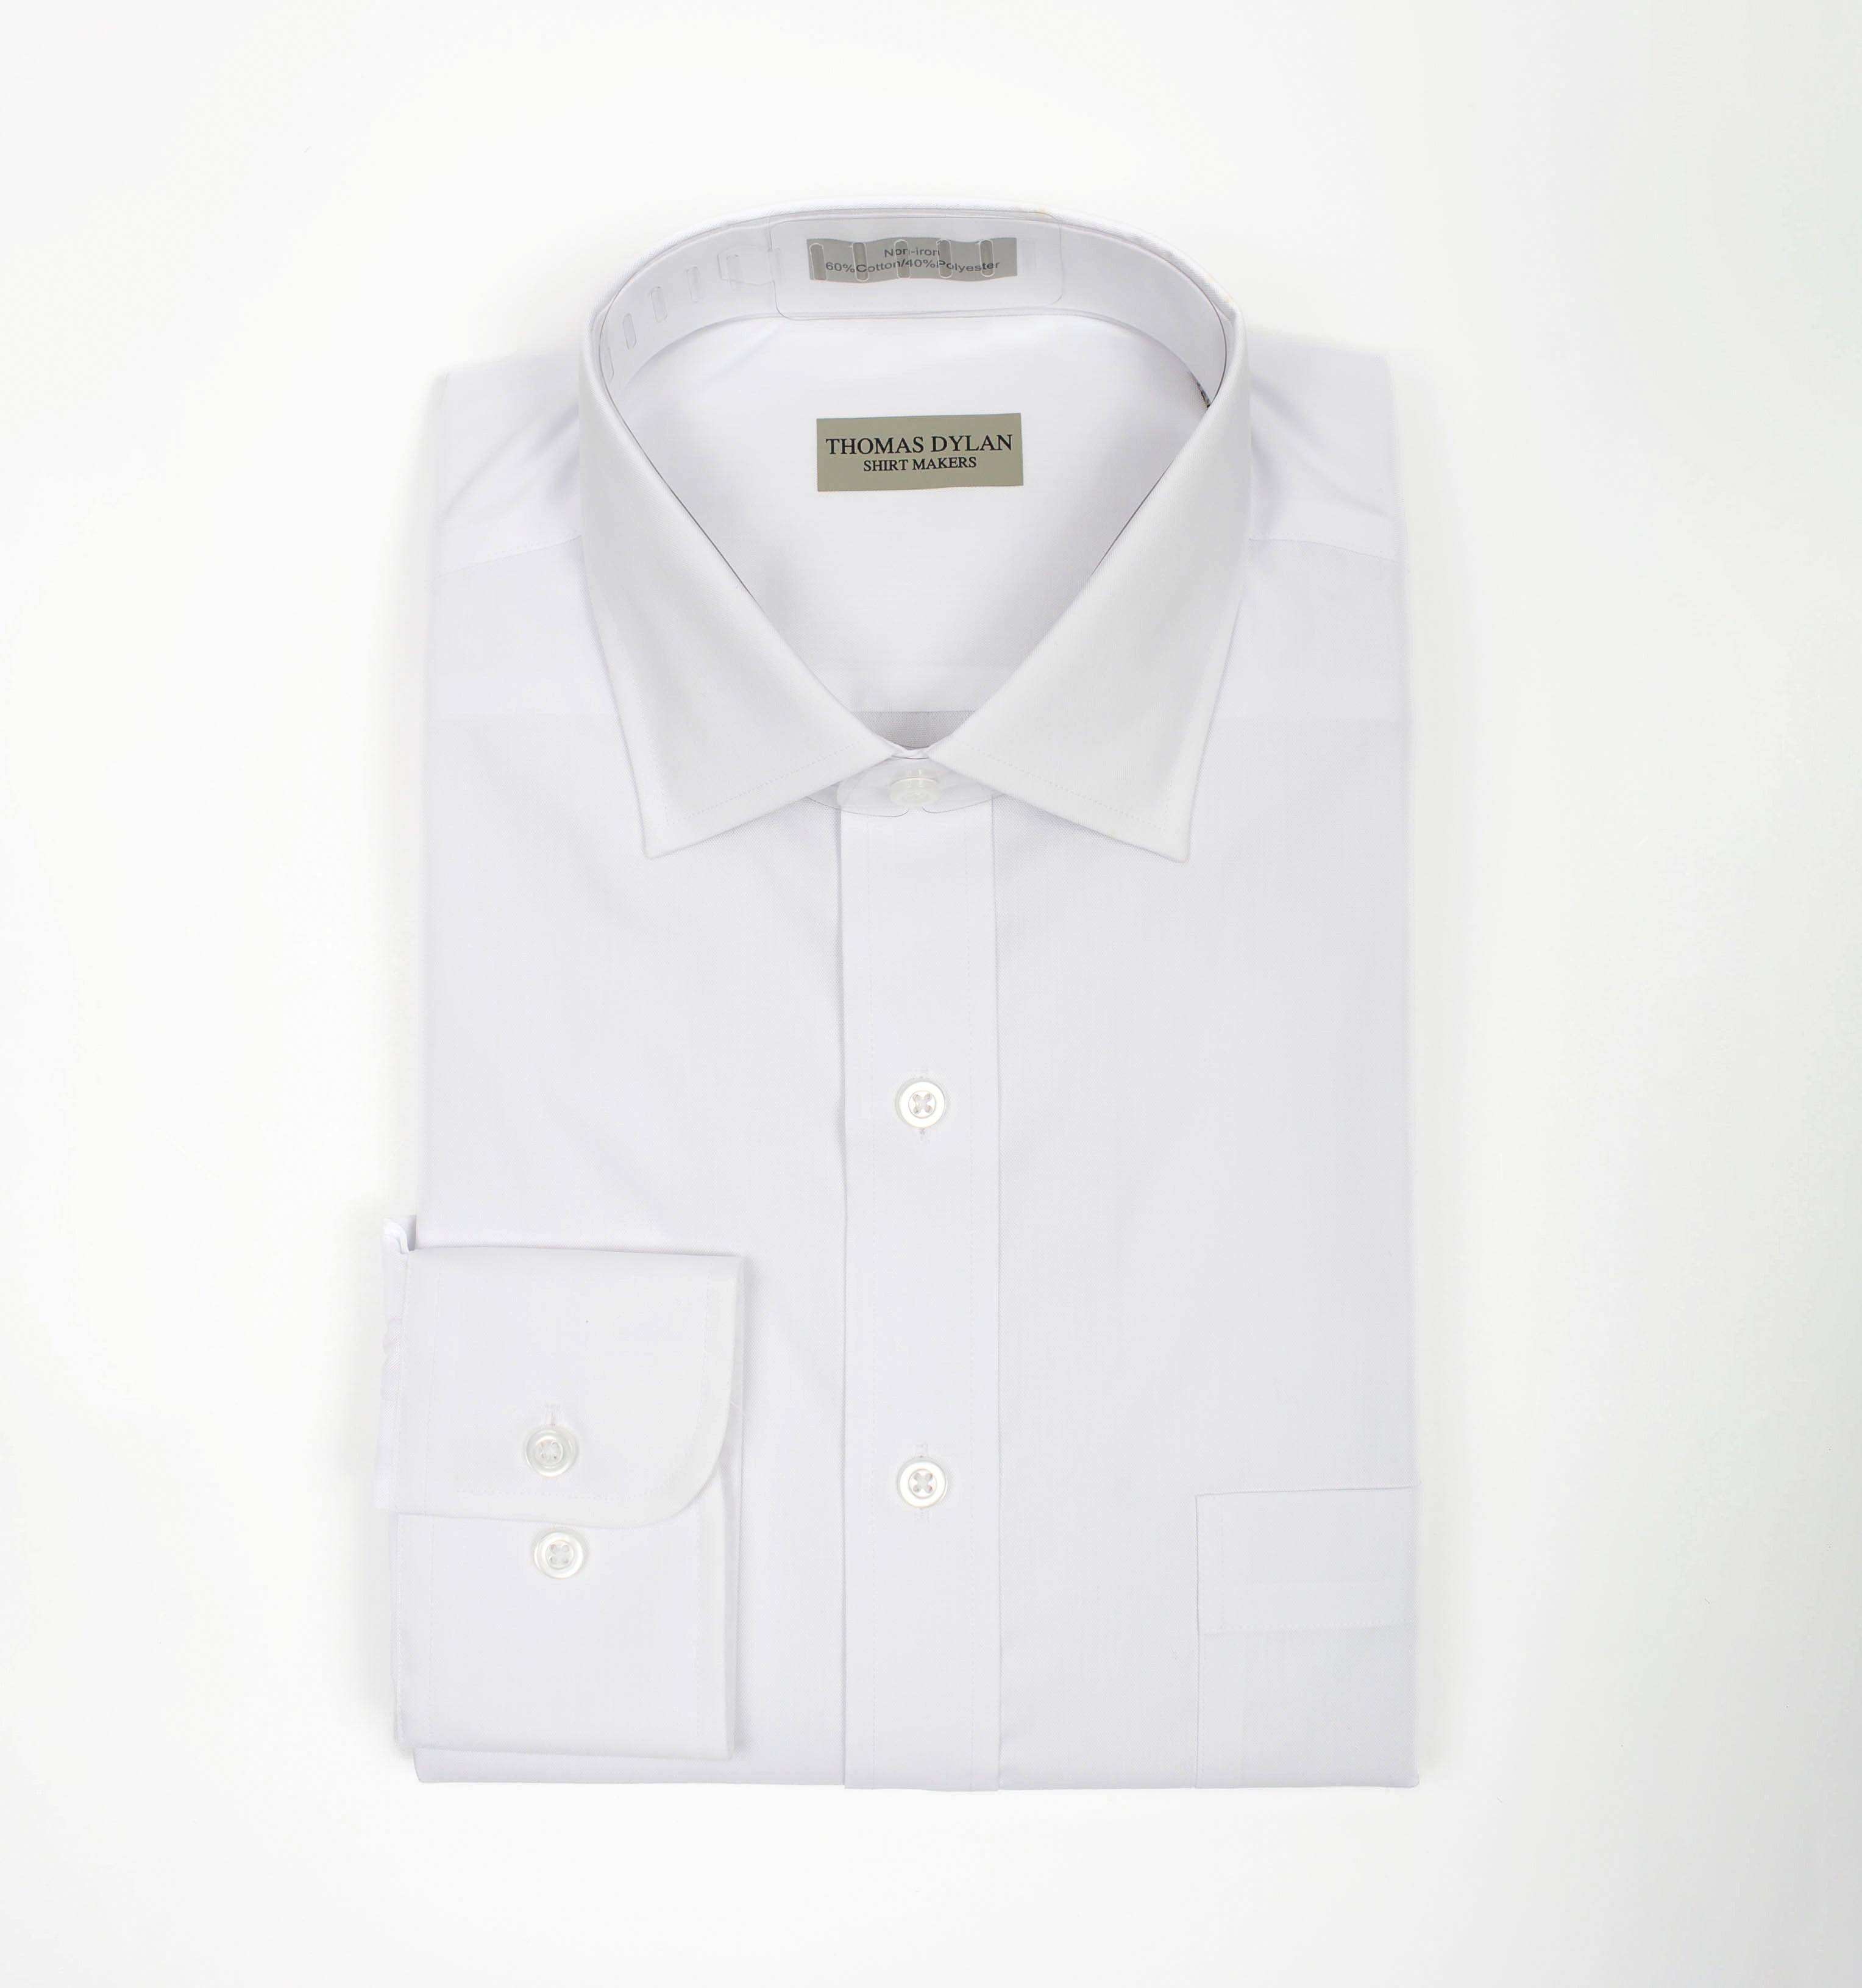 023 SS TF SC - Thomas Dylan White Short Sleeve Tailored Fit Spread Collar